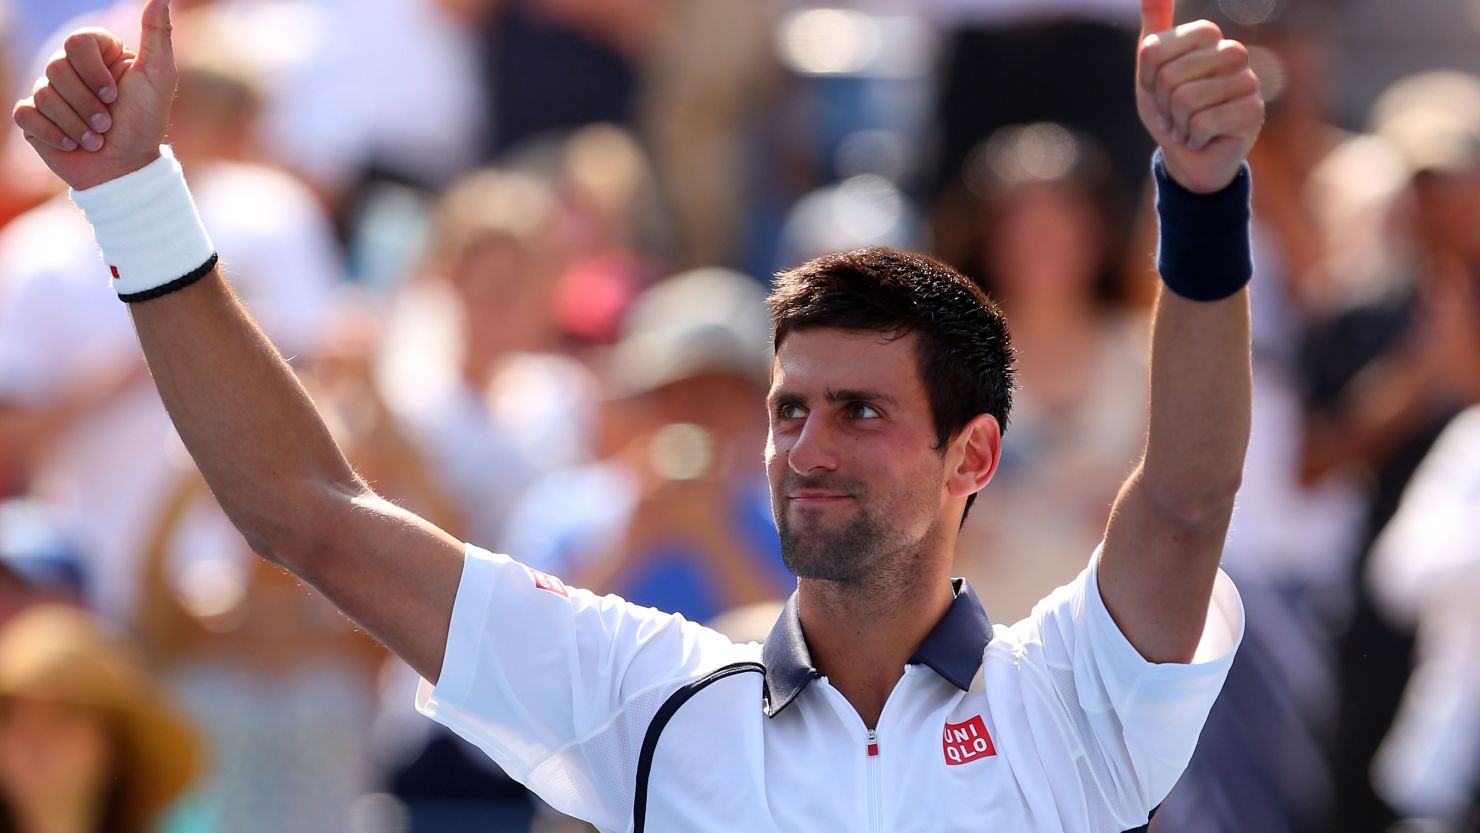 Novak Djokovic takes the applause of the crowd at Flushing Meadows after his straight sets win over Rogerio Dutra Silva 